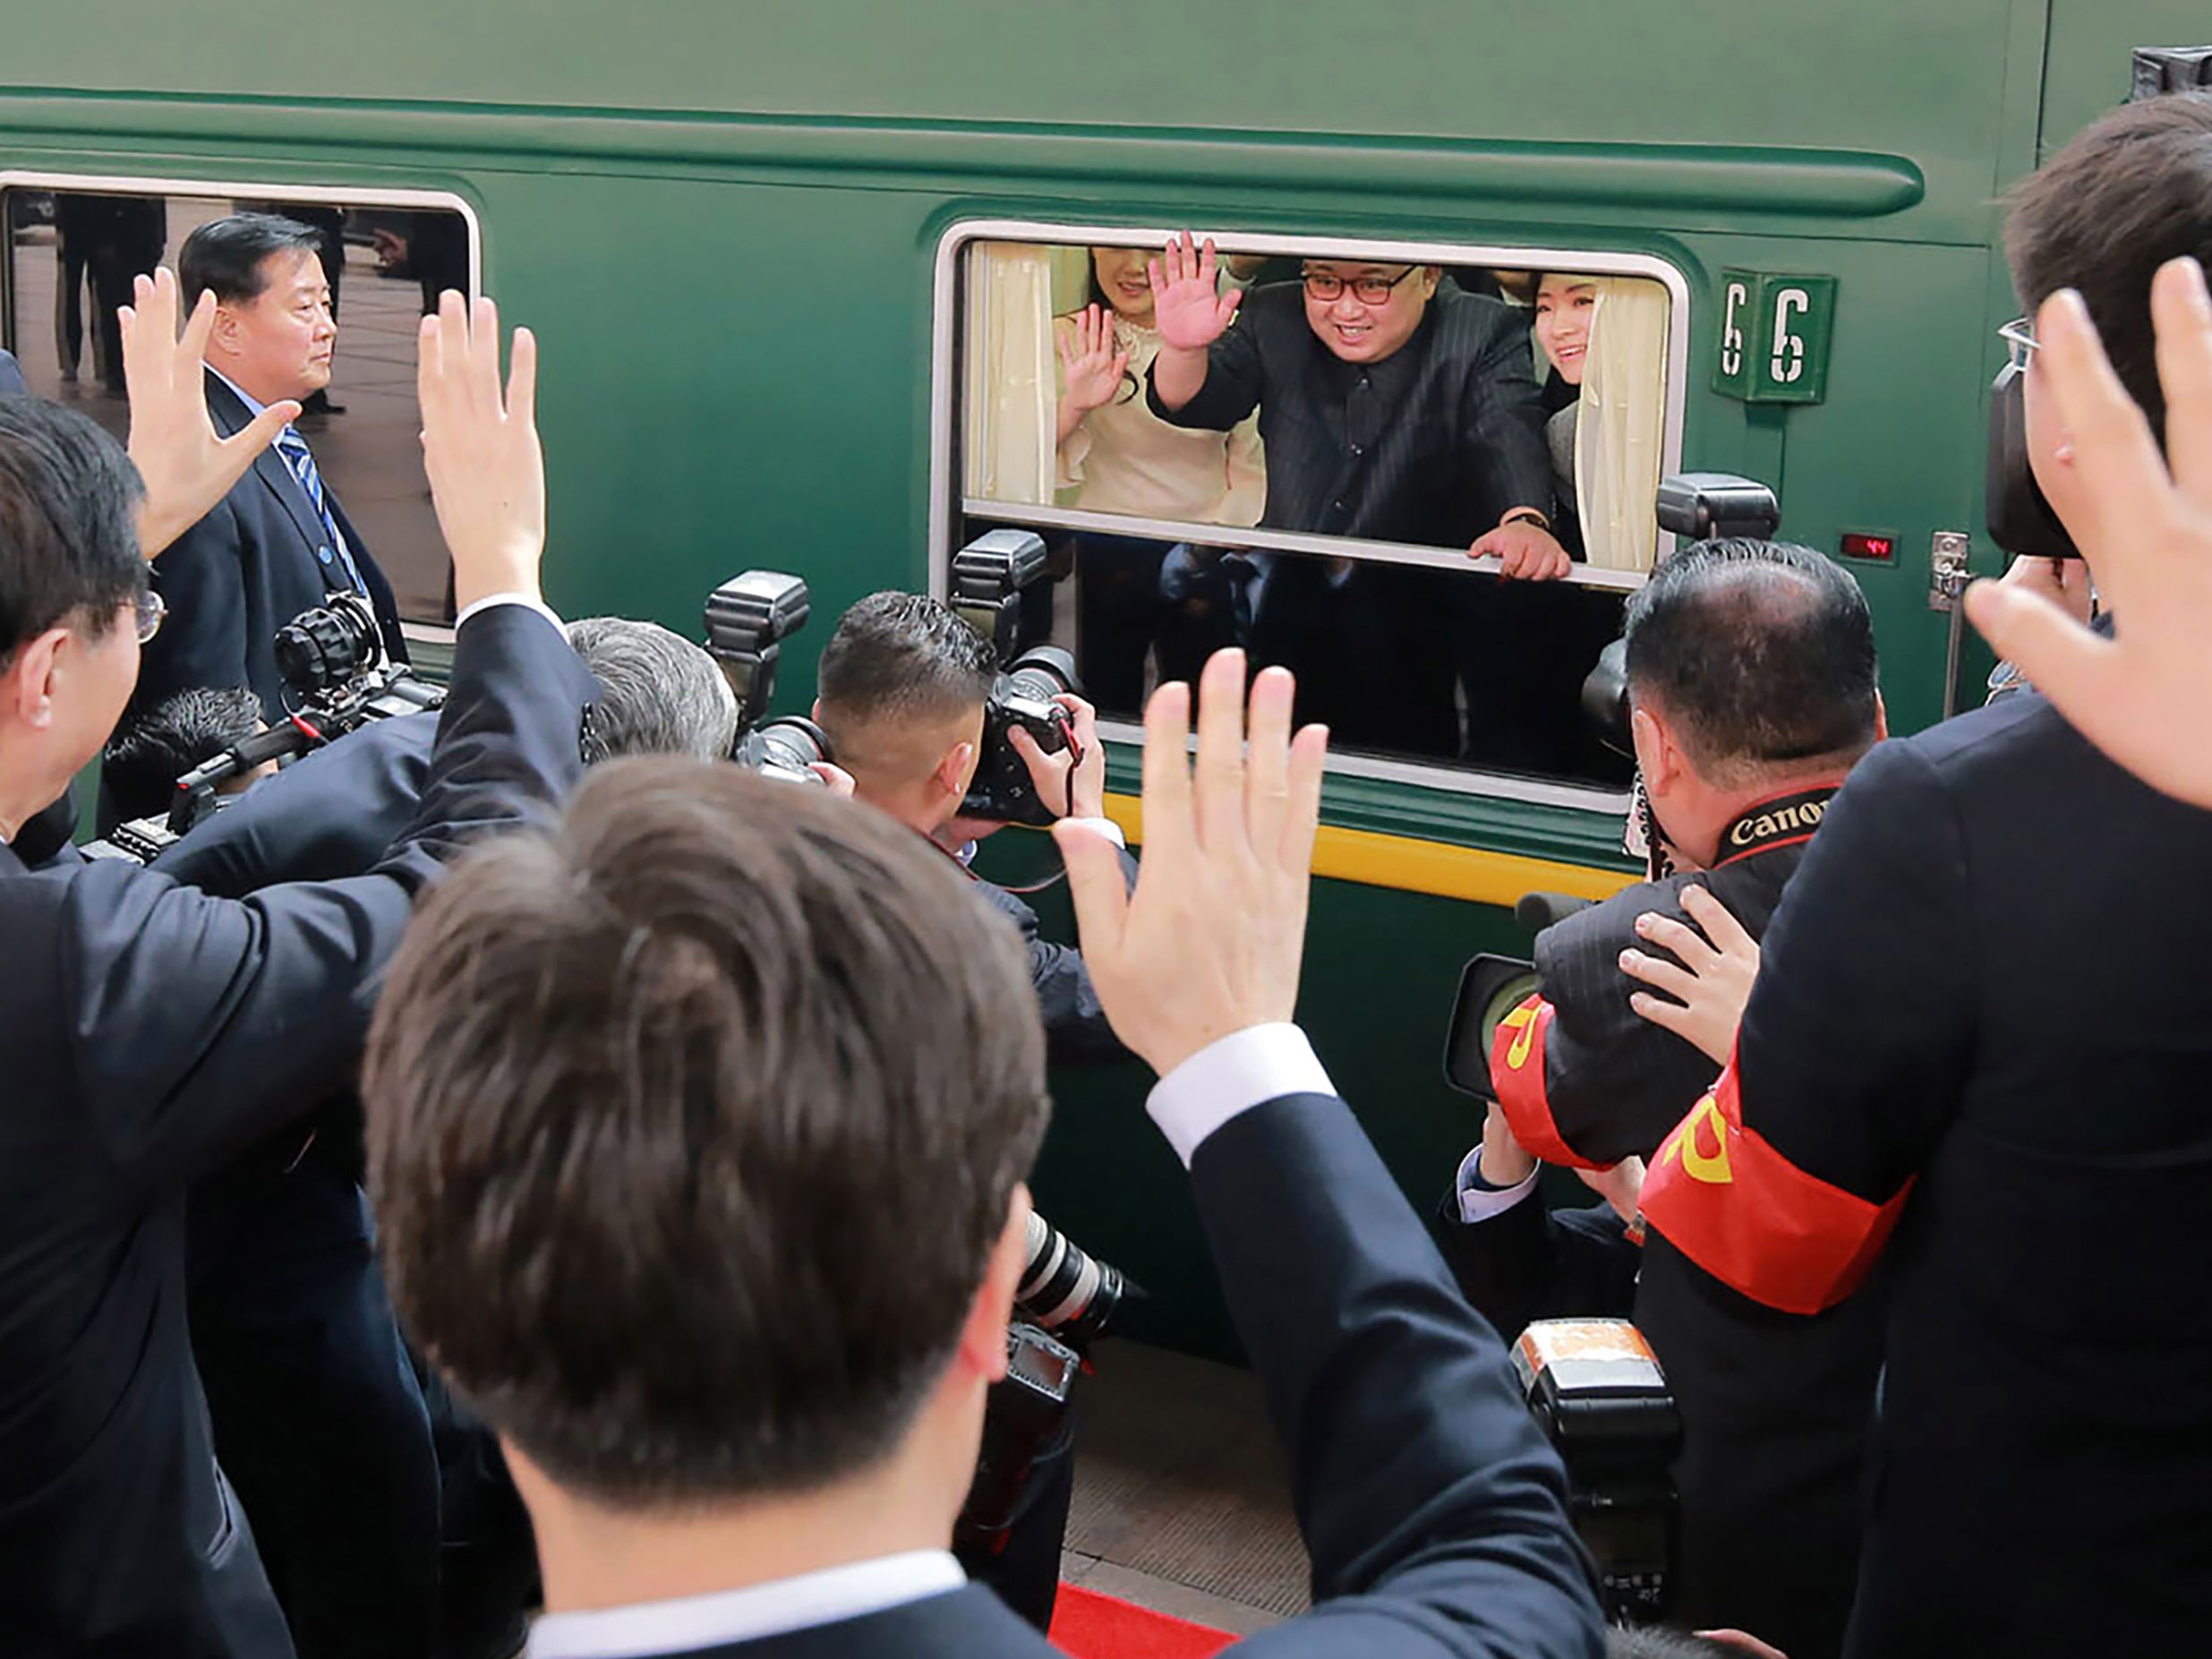 Kim Jong-un waves from inside his train as he prepares to depart from Beijing, in this photo released by KCNA